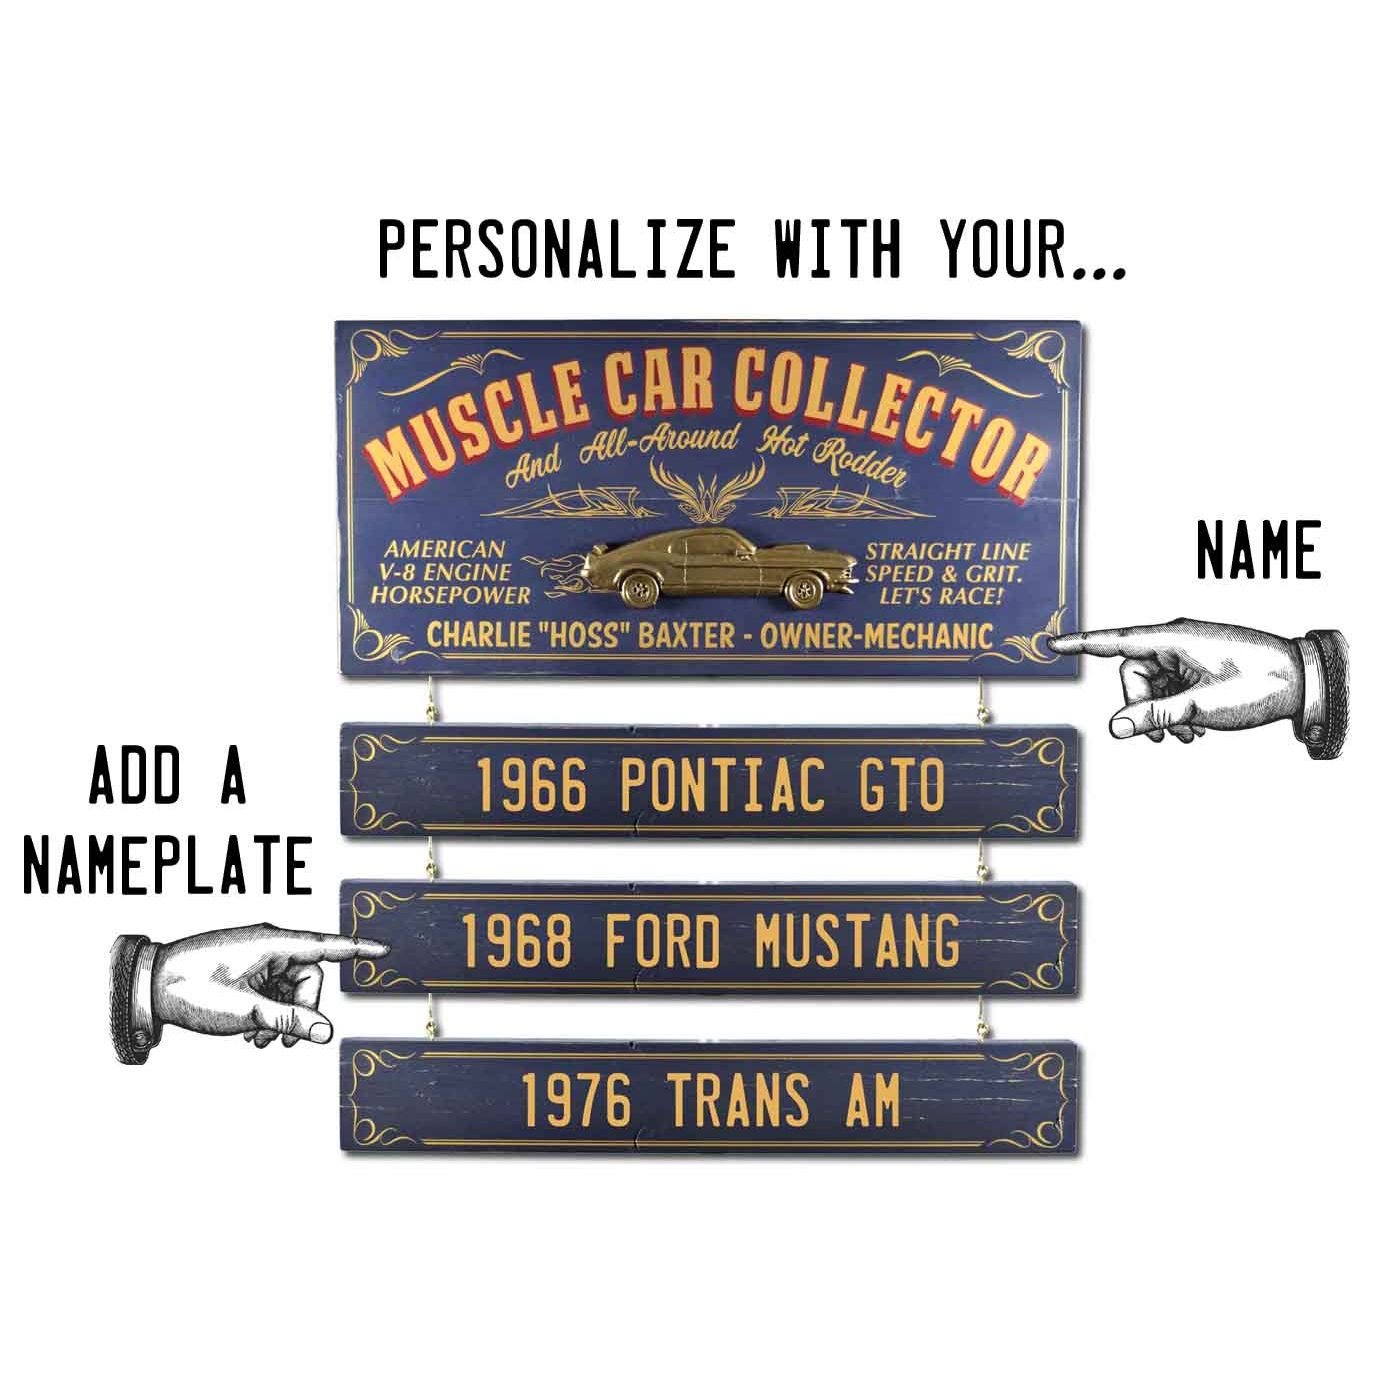 Blue and gold sign for Muscle Car Collector; raised image of car; customize name and hanging boards with car names